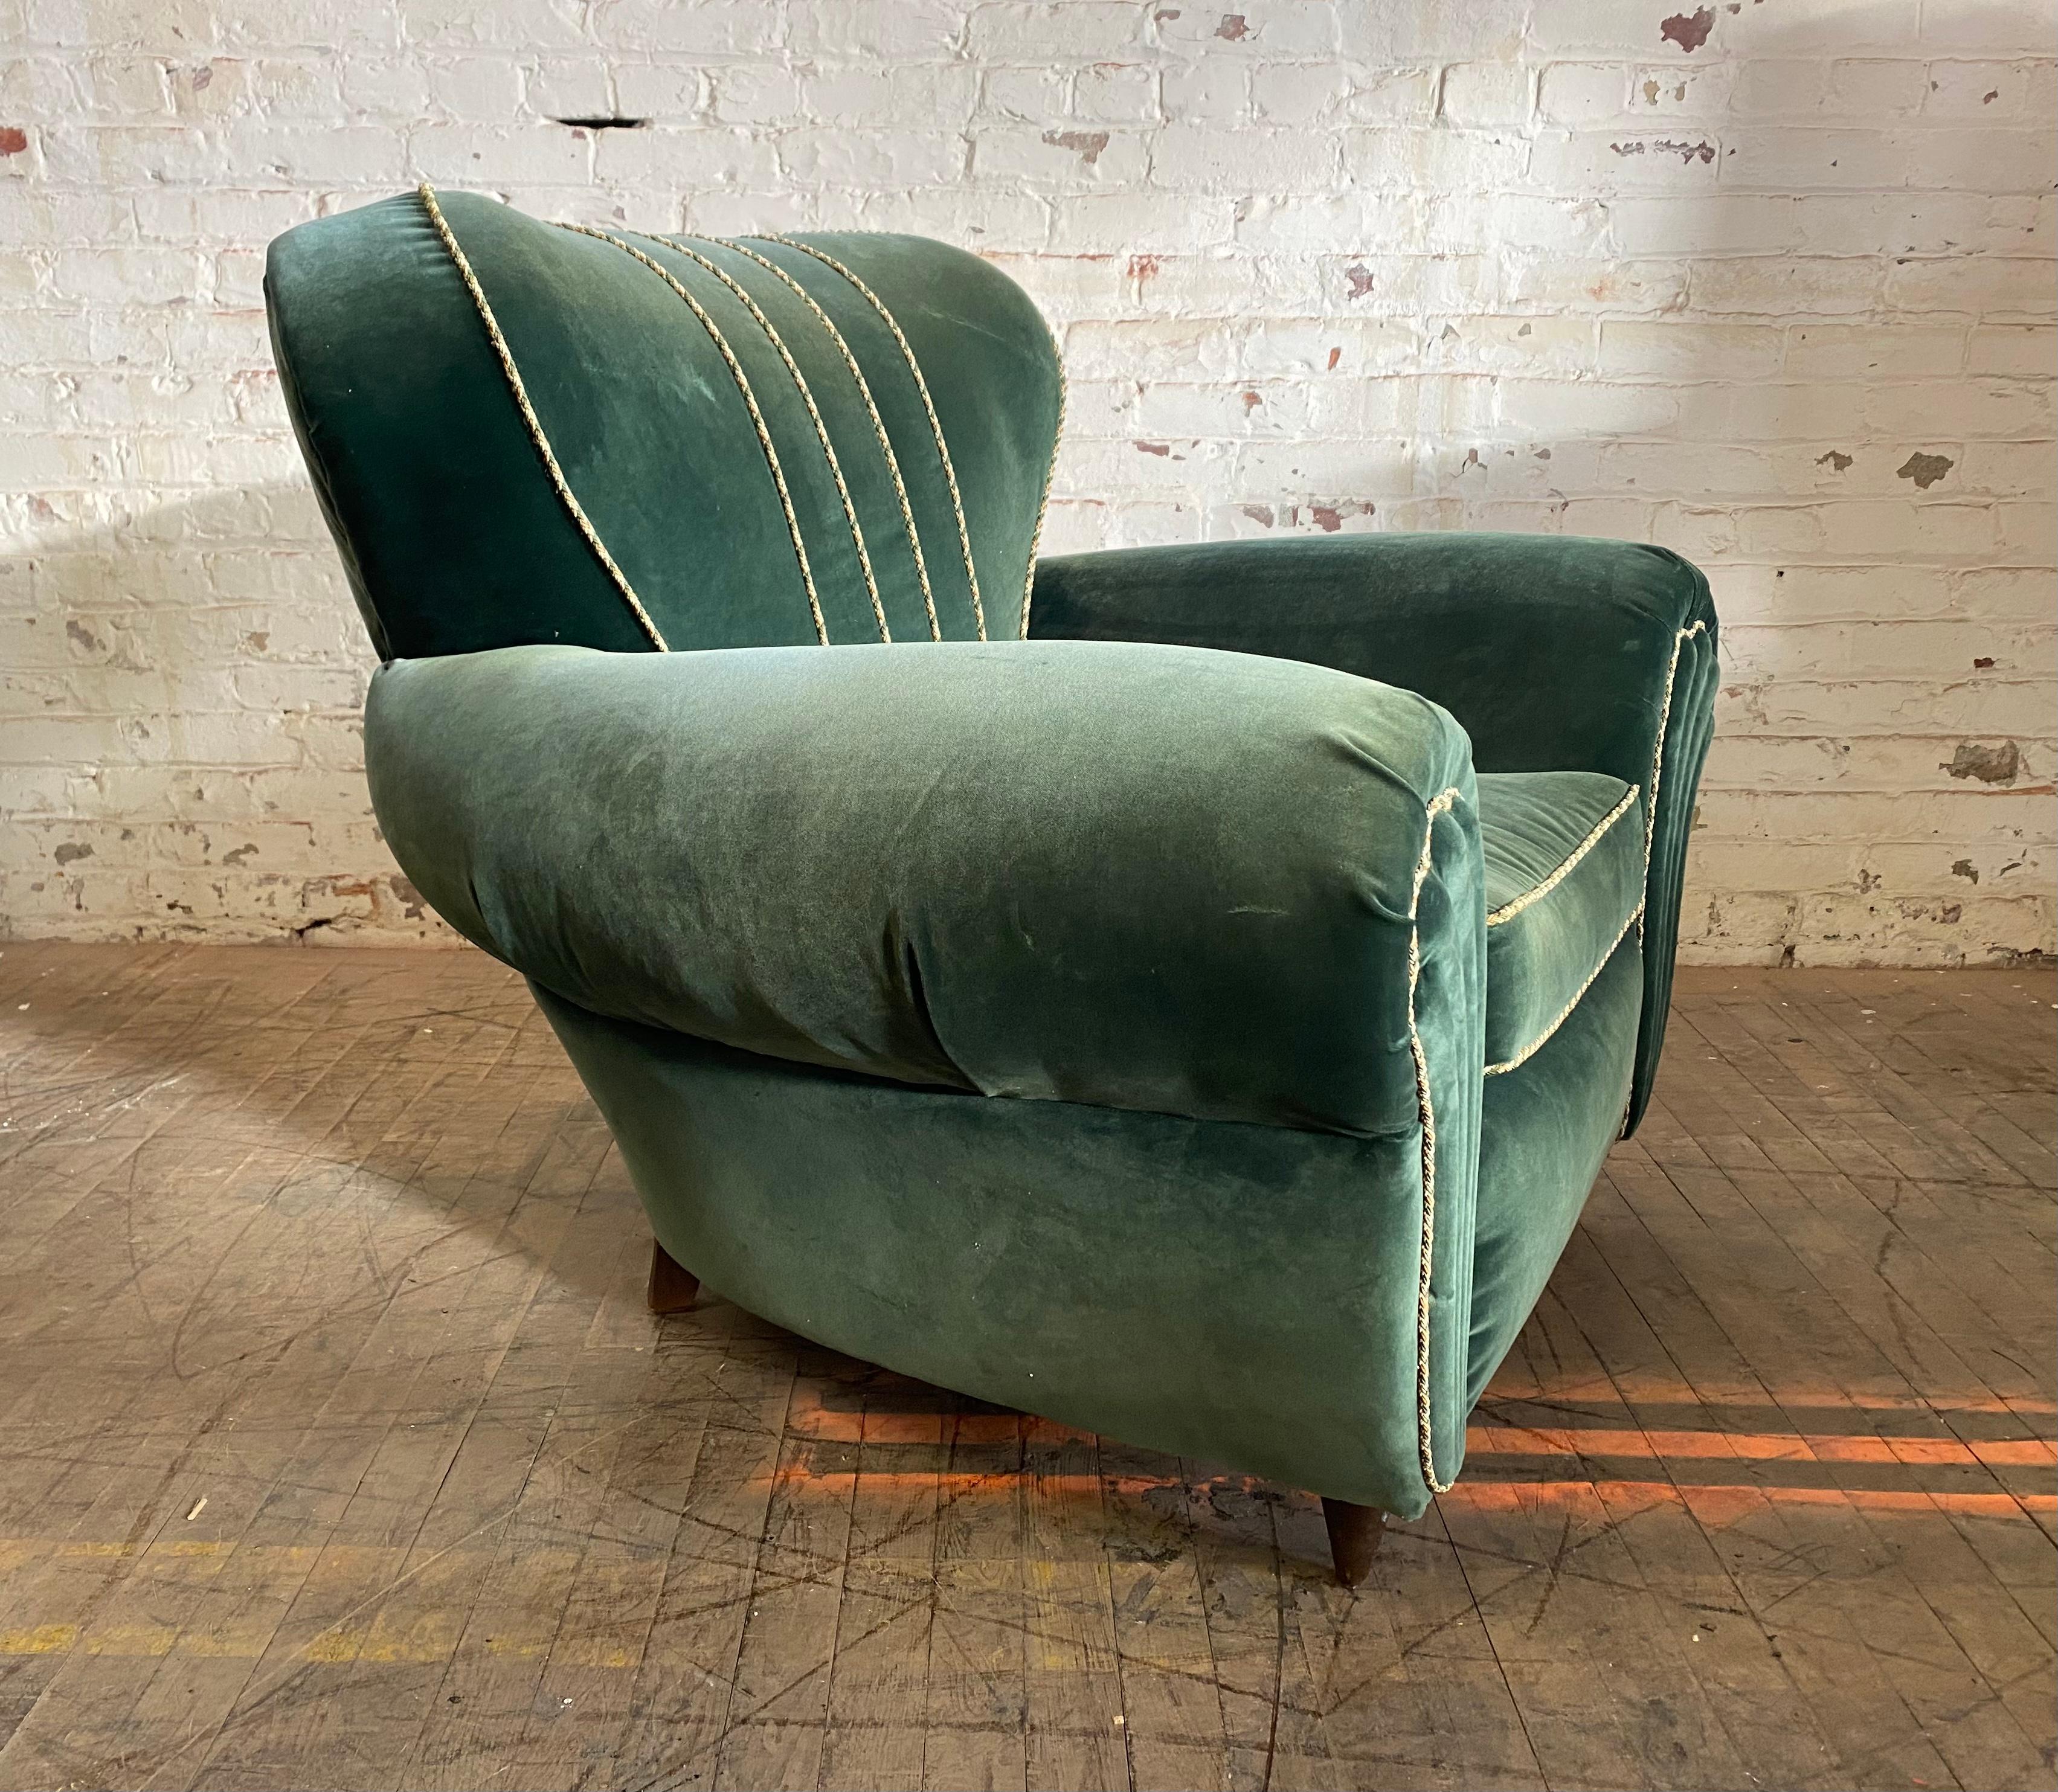 1940s Art Deco Italian Club Chairs, Unusual Form, Oversized by Guglielmo Ulrich In Good Condition For Sale In Buffalo, NY